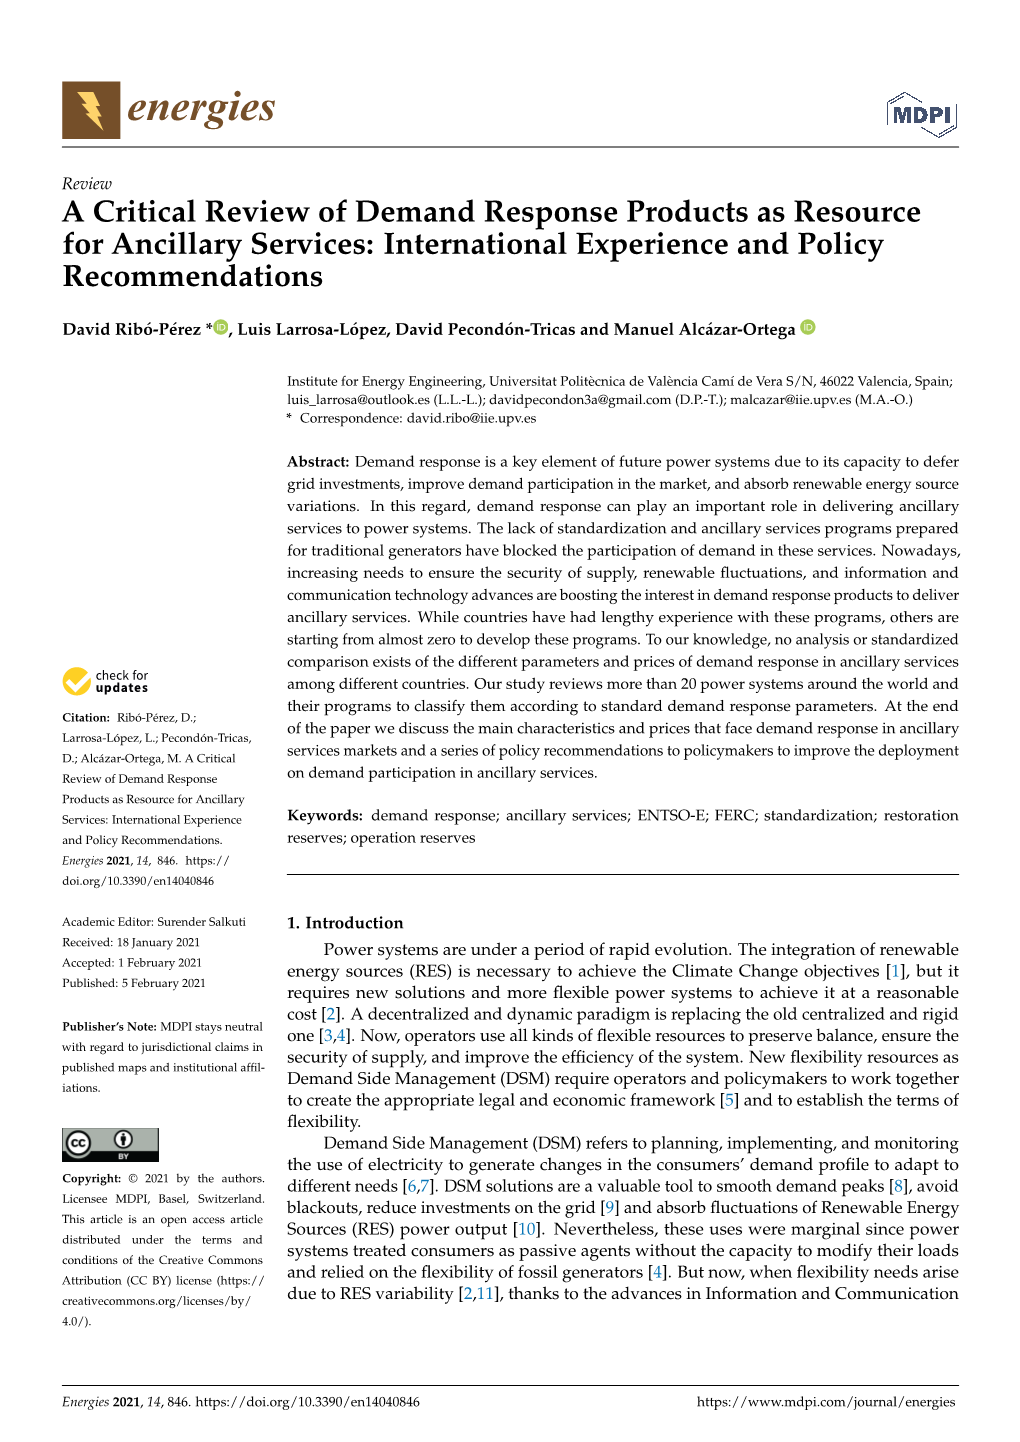 A Critical Review of Demand Response Products As Resource for Ancillary Services: International Experience and Policy Recommendations